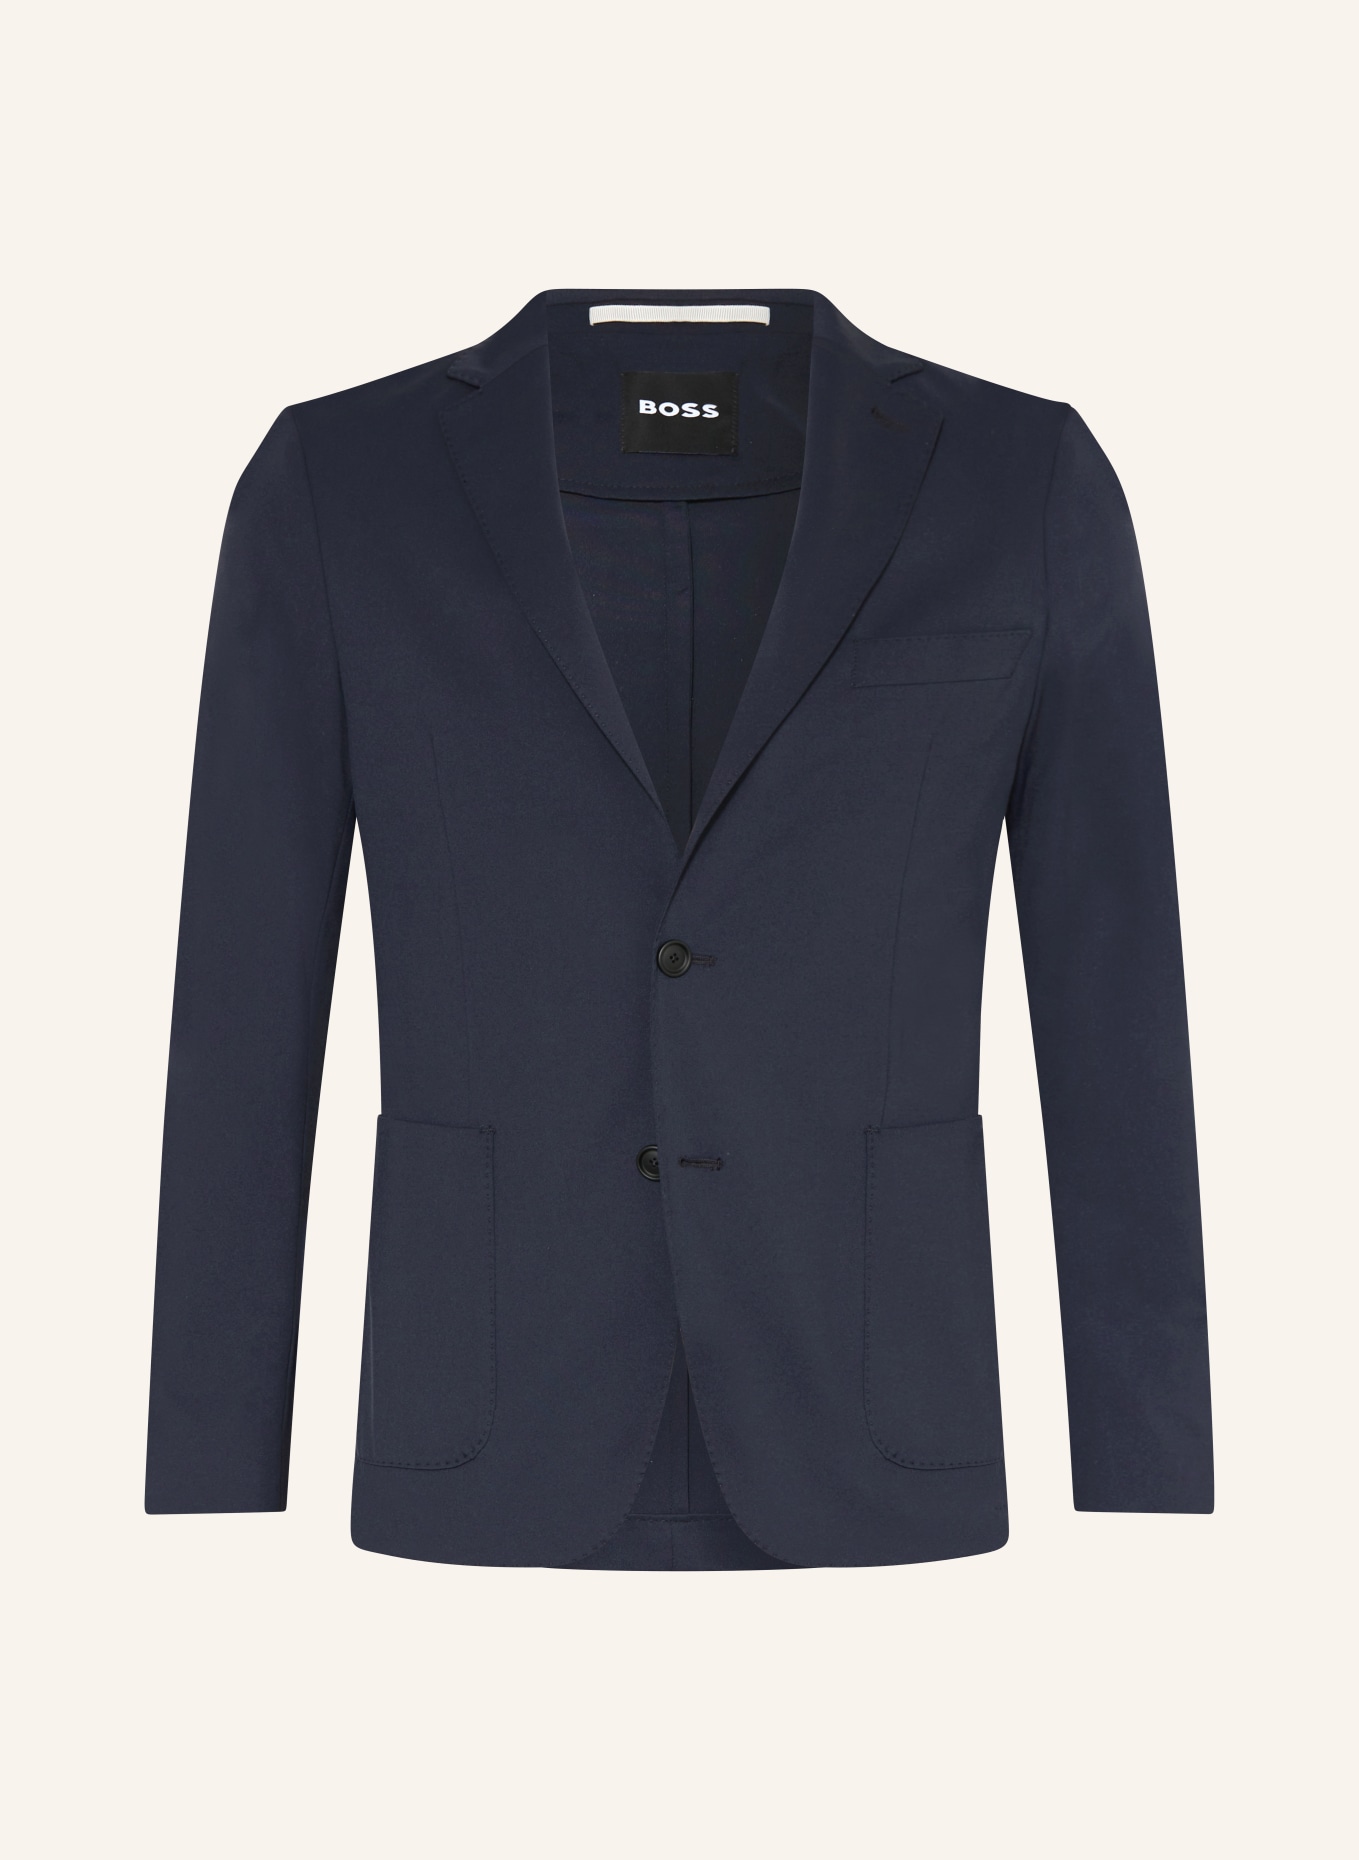 BOSS Suit jacket HANRY extra slim fit made of jersey, Color: DARK BLUE (Image 1)